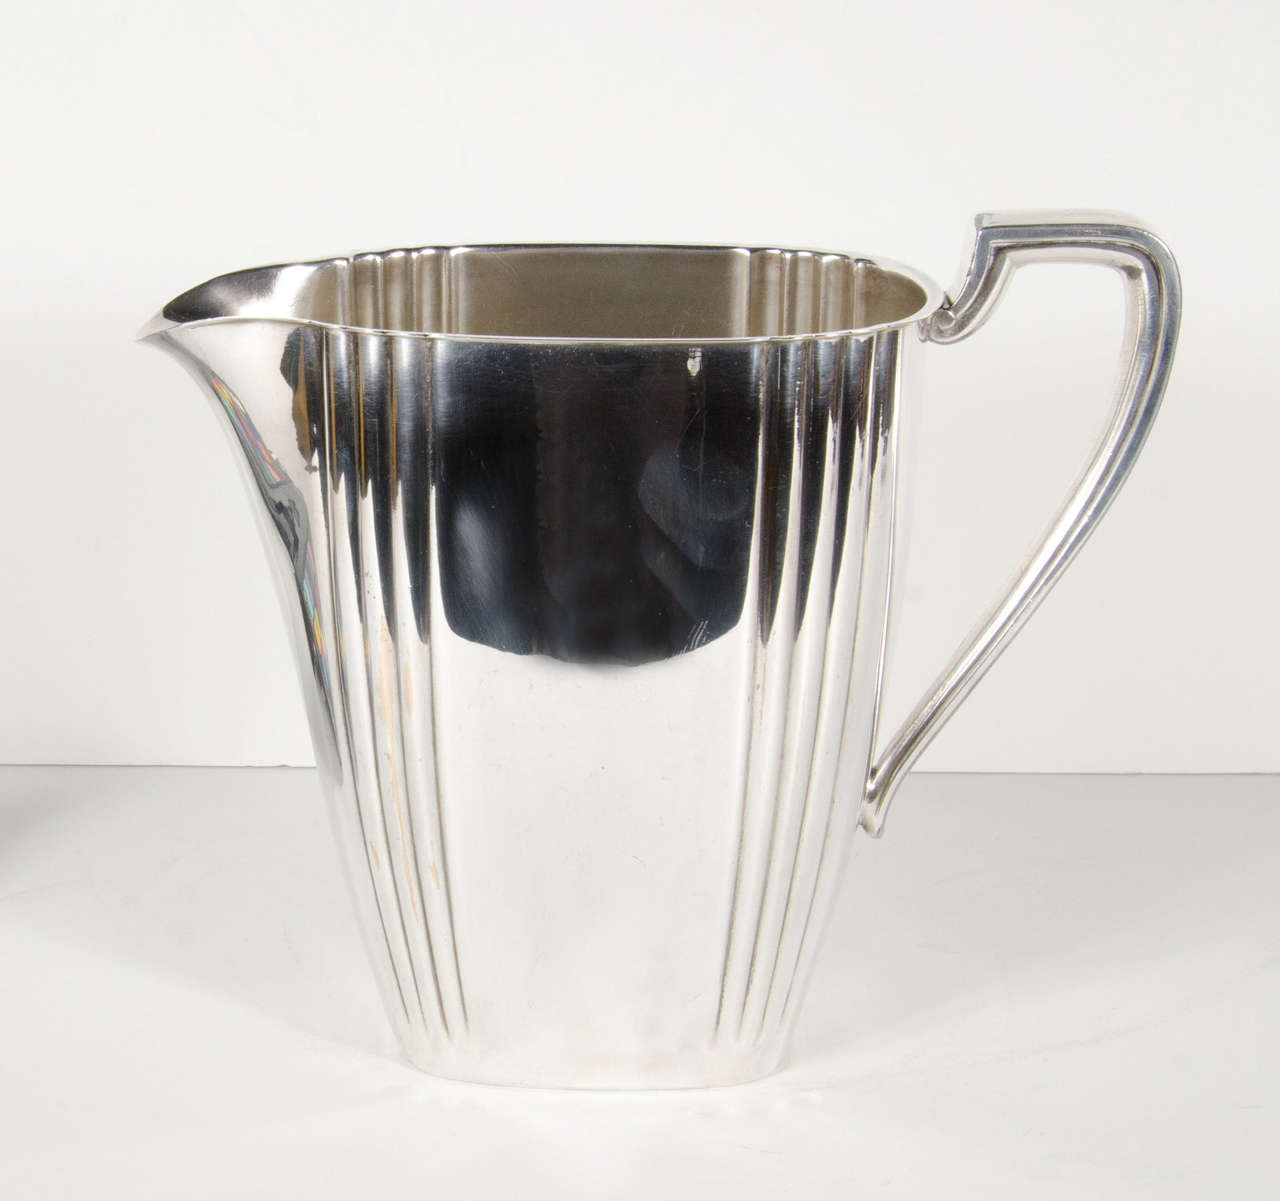 American Elegant Art Deco Silver-plate Pitcher by Rogers Co